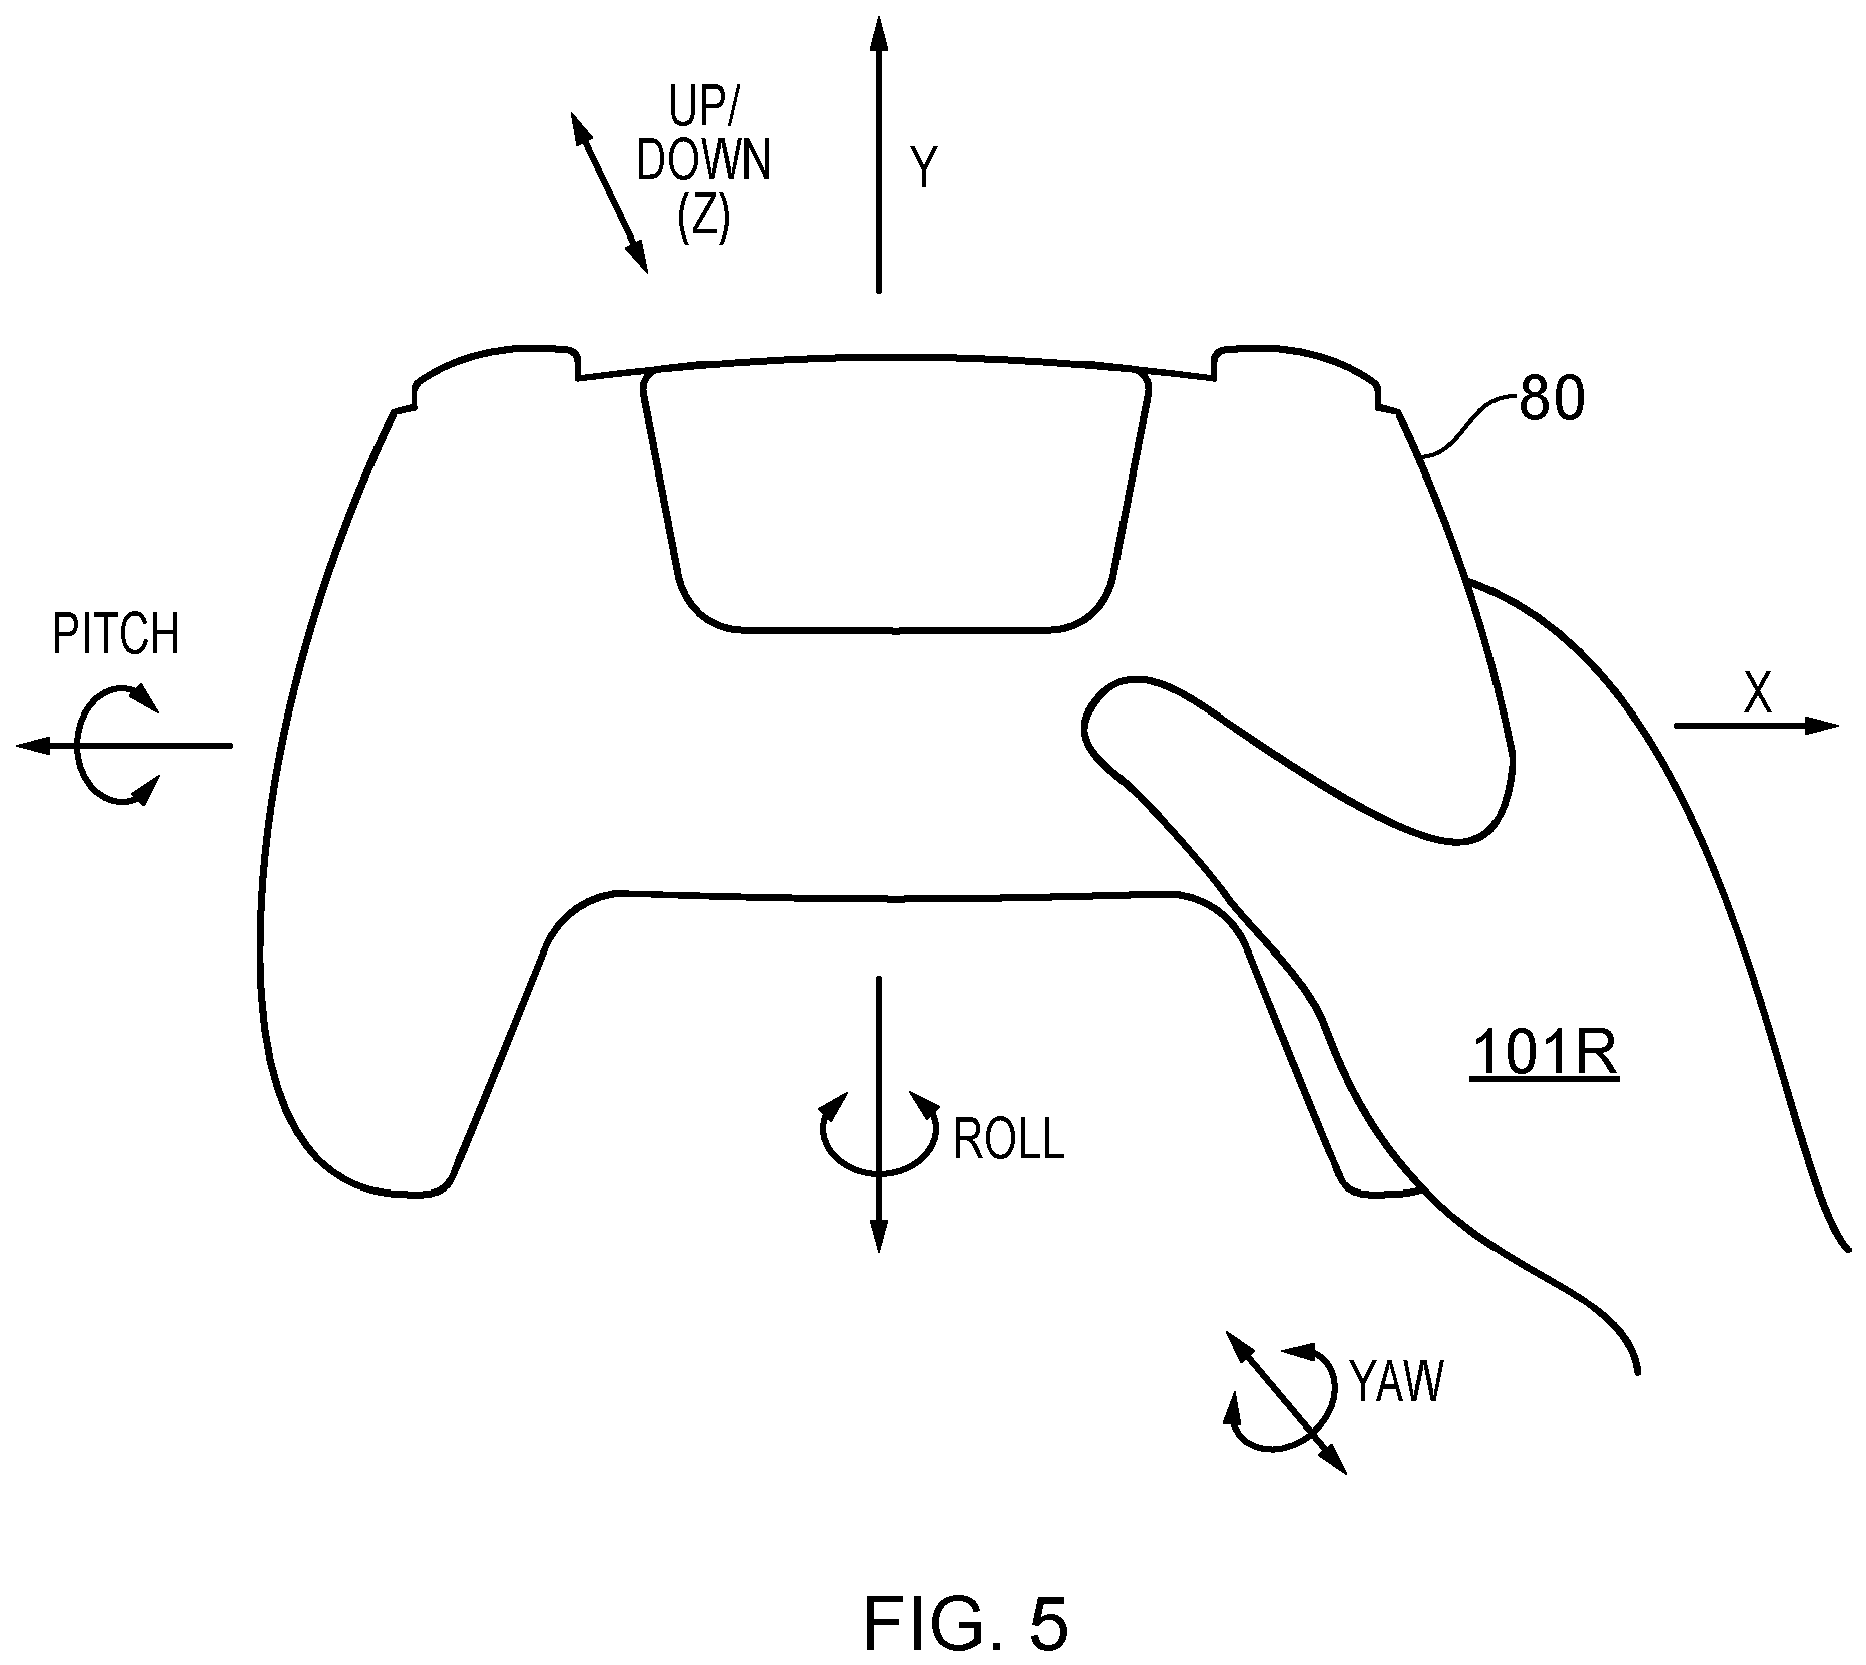 The figure shows how a handheld controller can be used with a single hand.